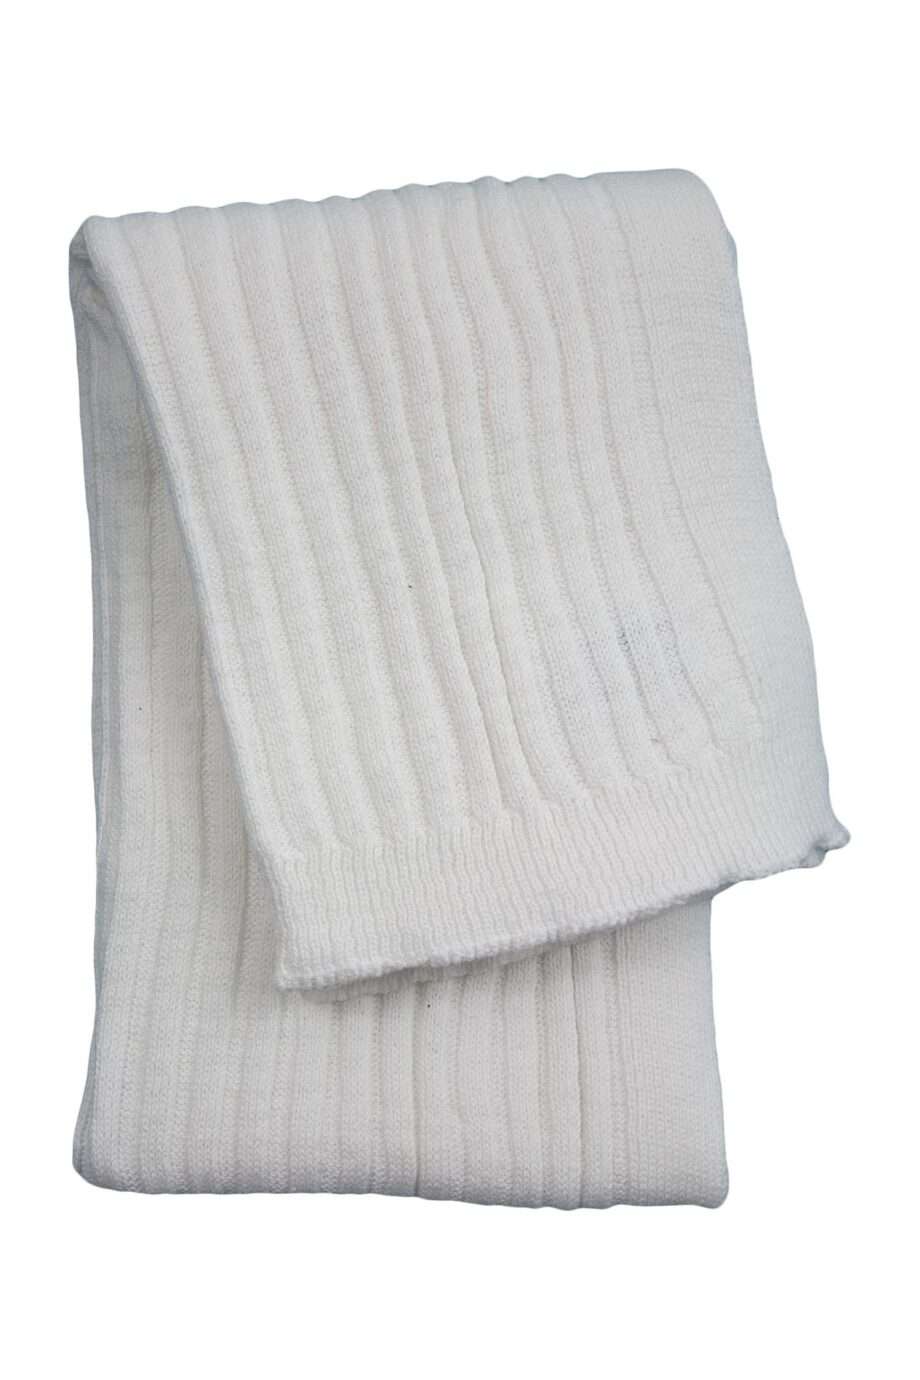 ribs small white knitted cotton little blanket small